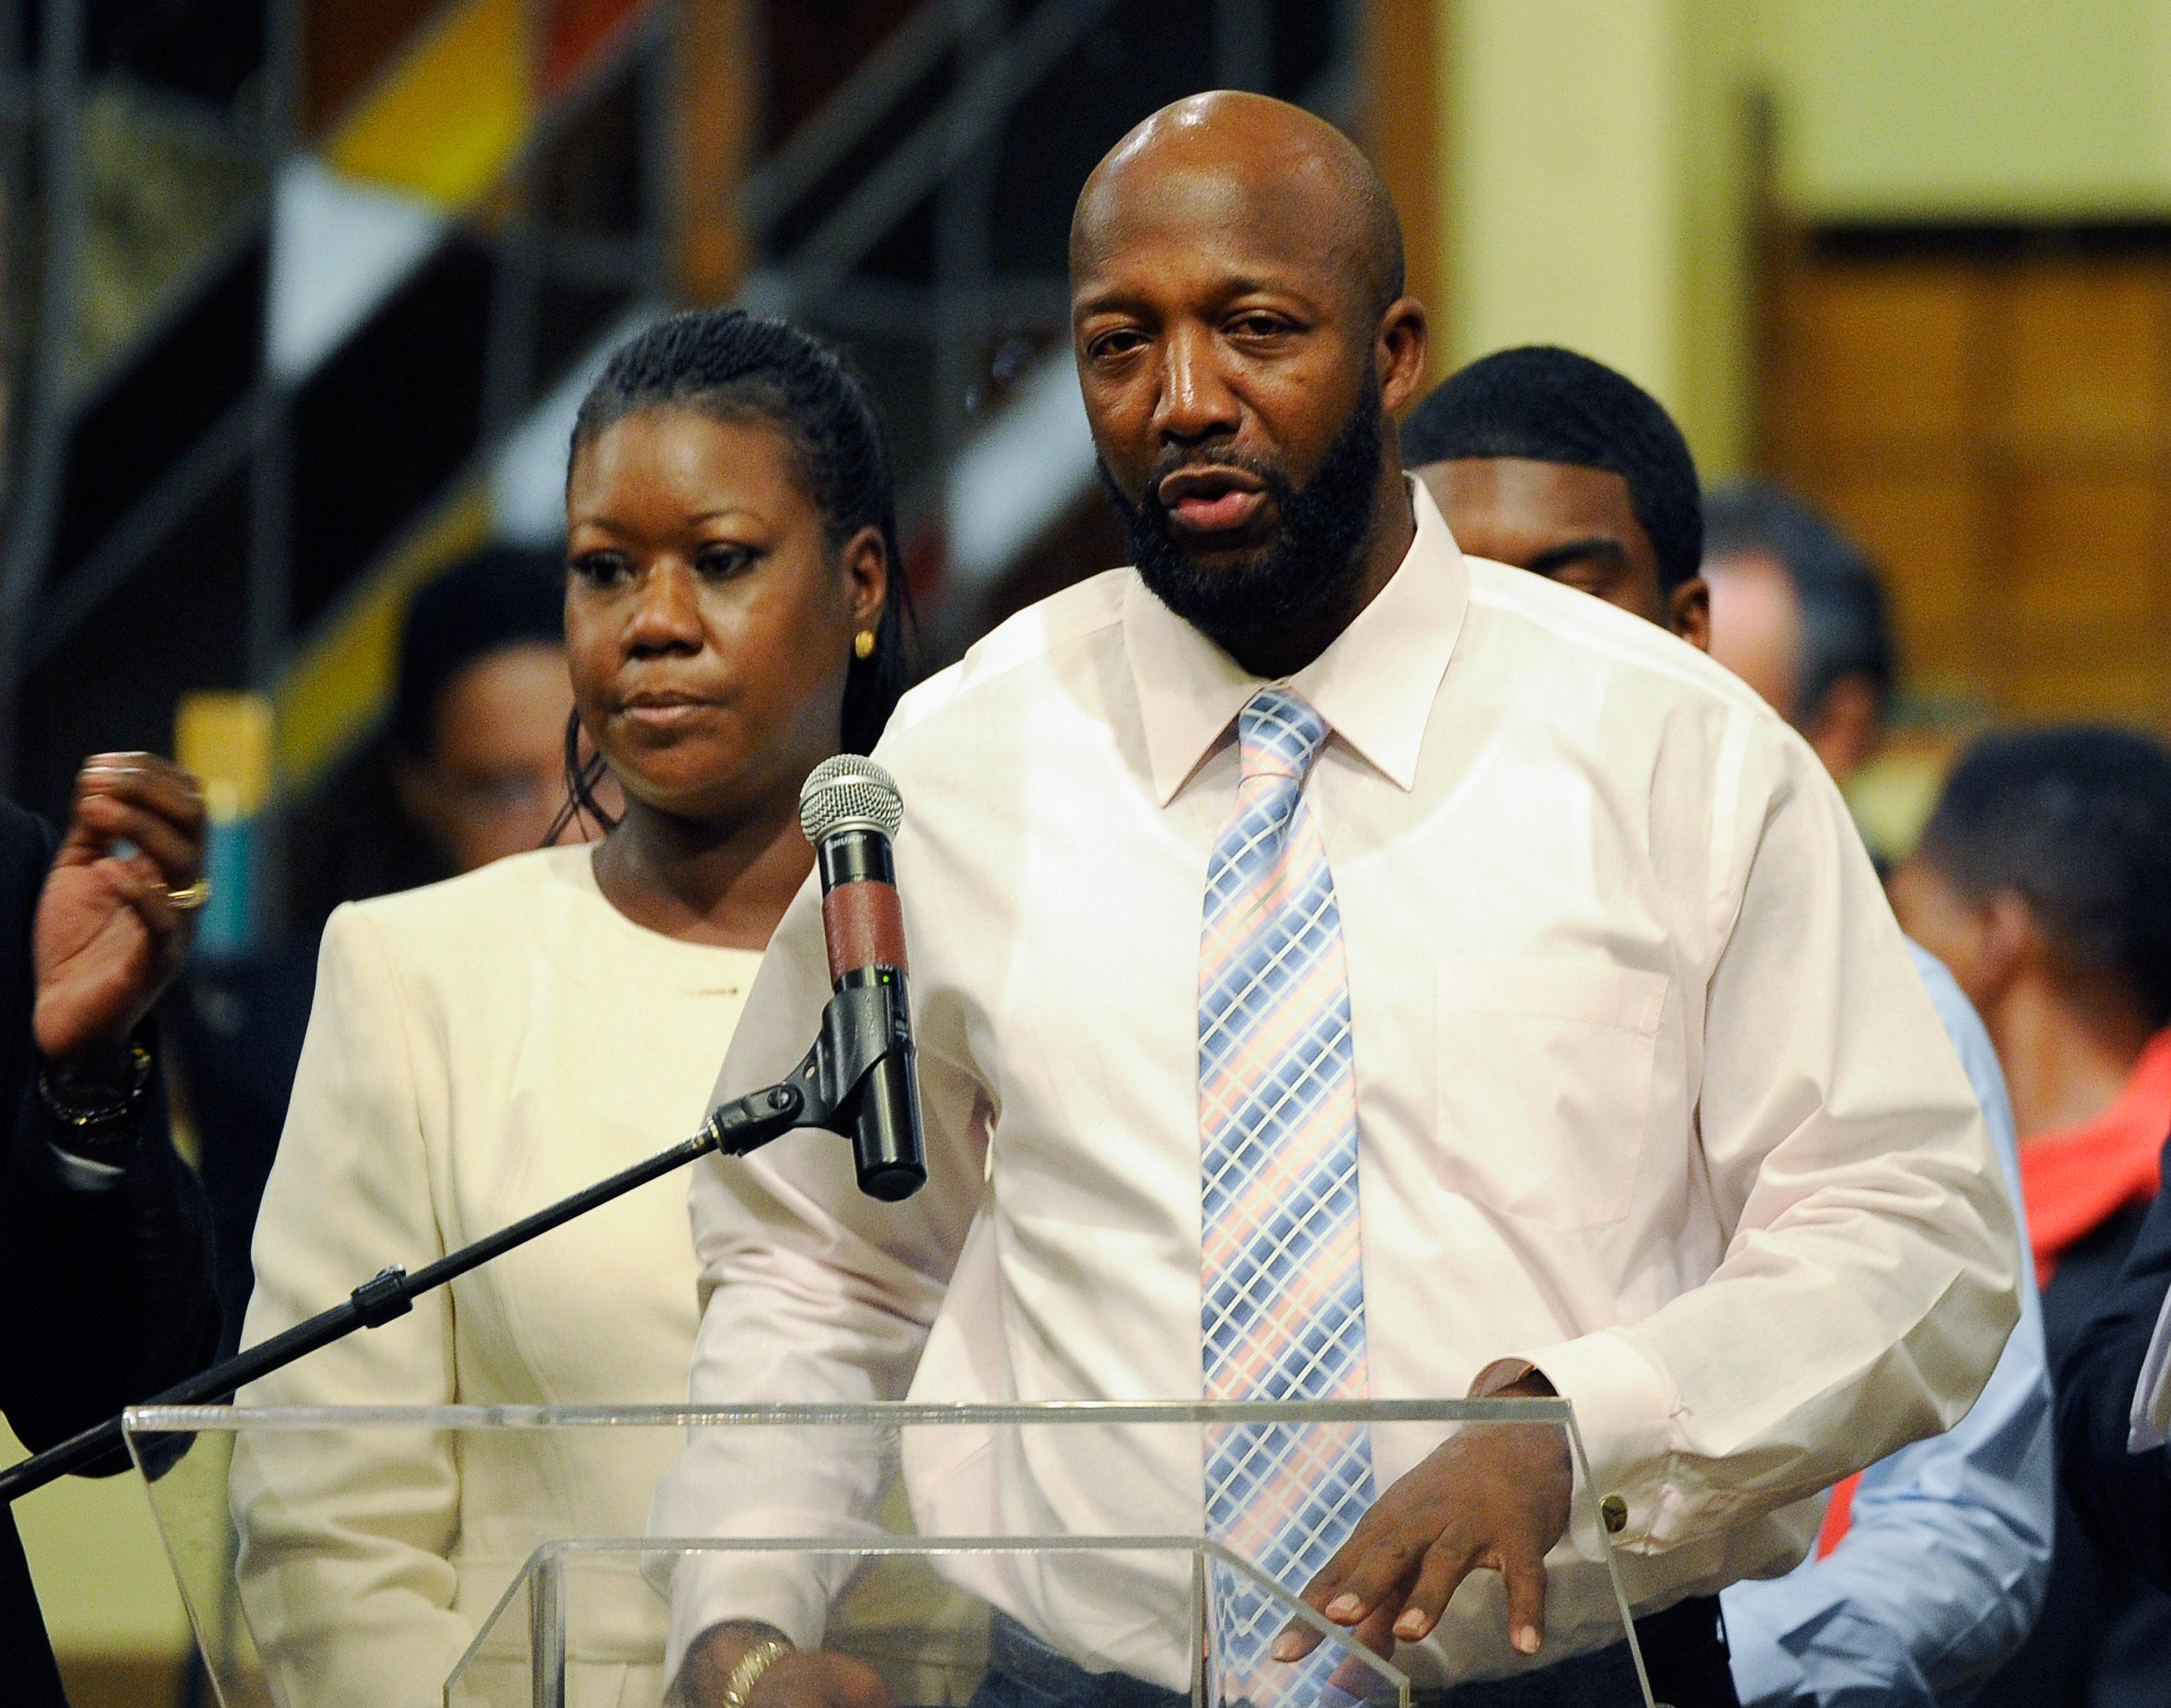 Civil Rights Groups Hold Rally For Trayvon Martin, Address Racial Profiling